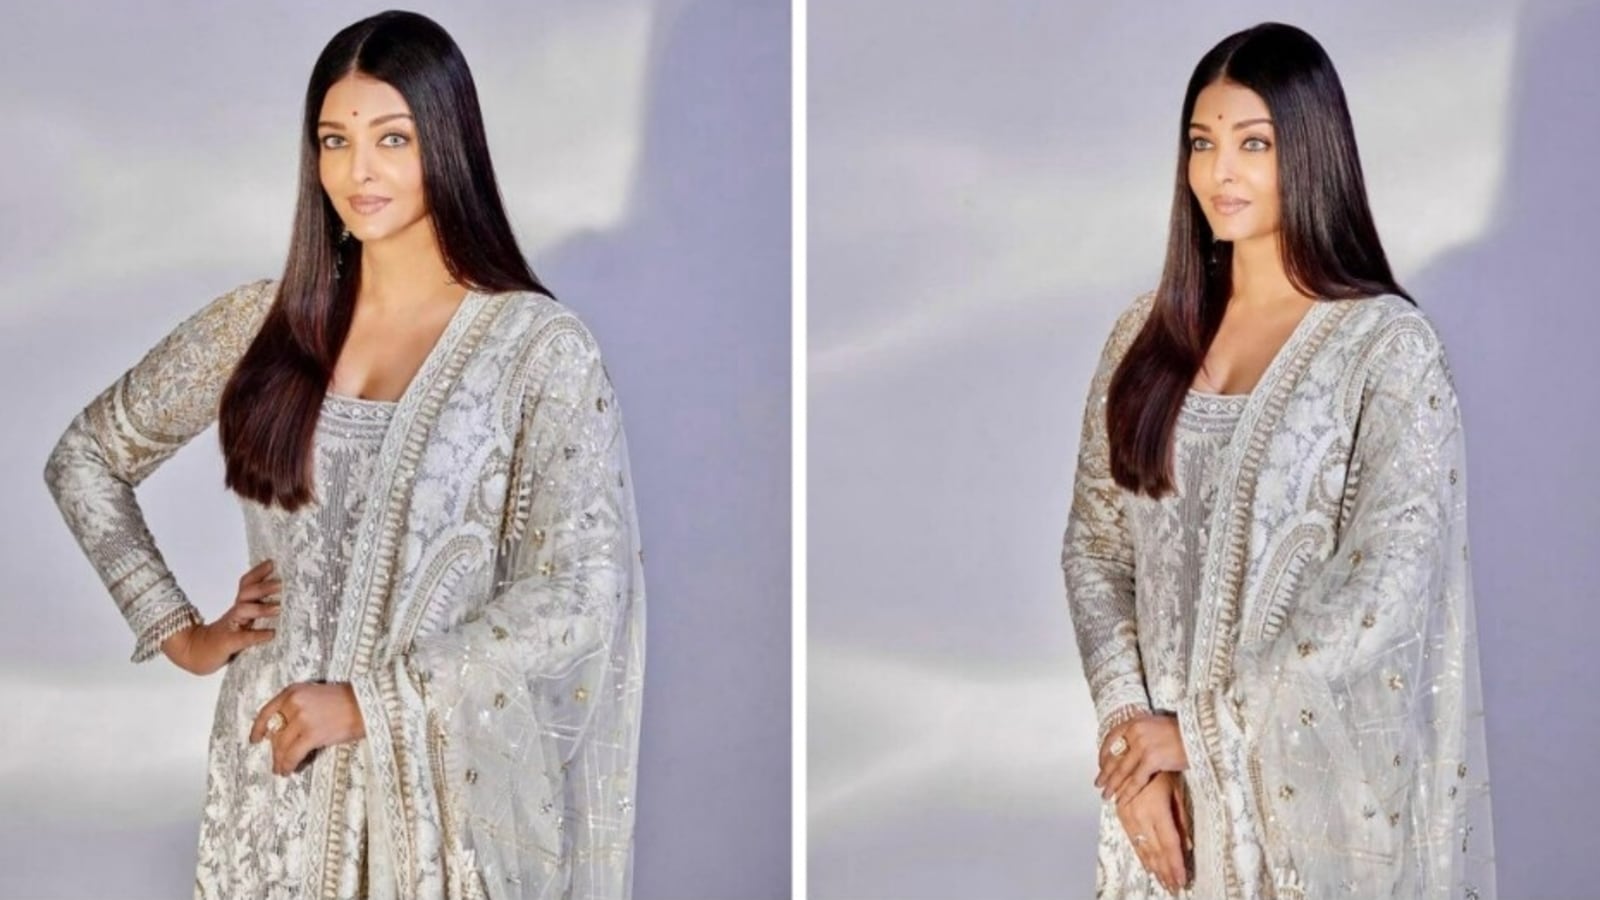 ‘Apsara of Bollywood’ Aishwarya Rai looks elegant in white in her latest pictures, fans react